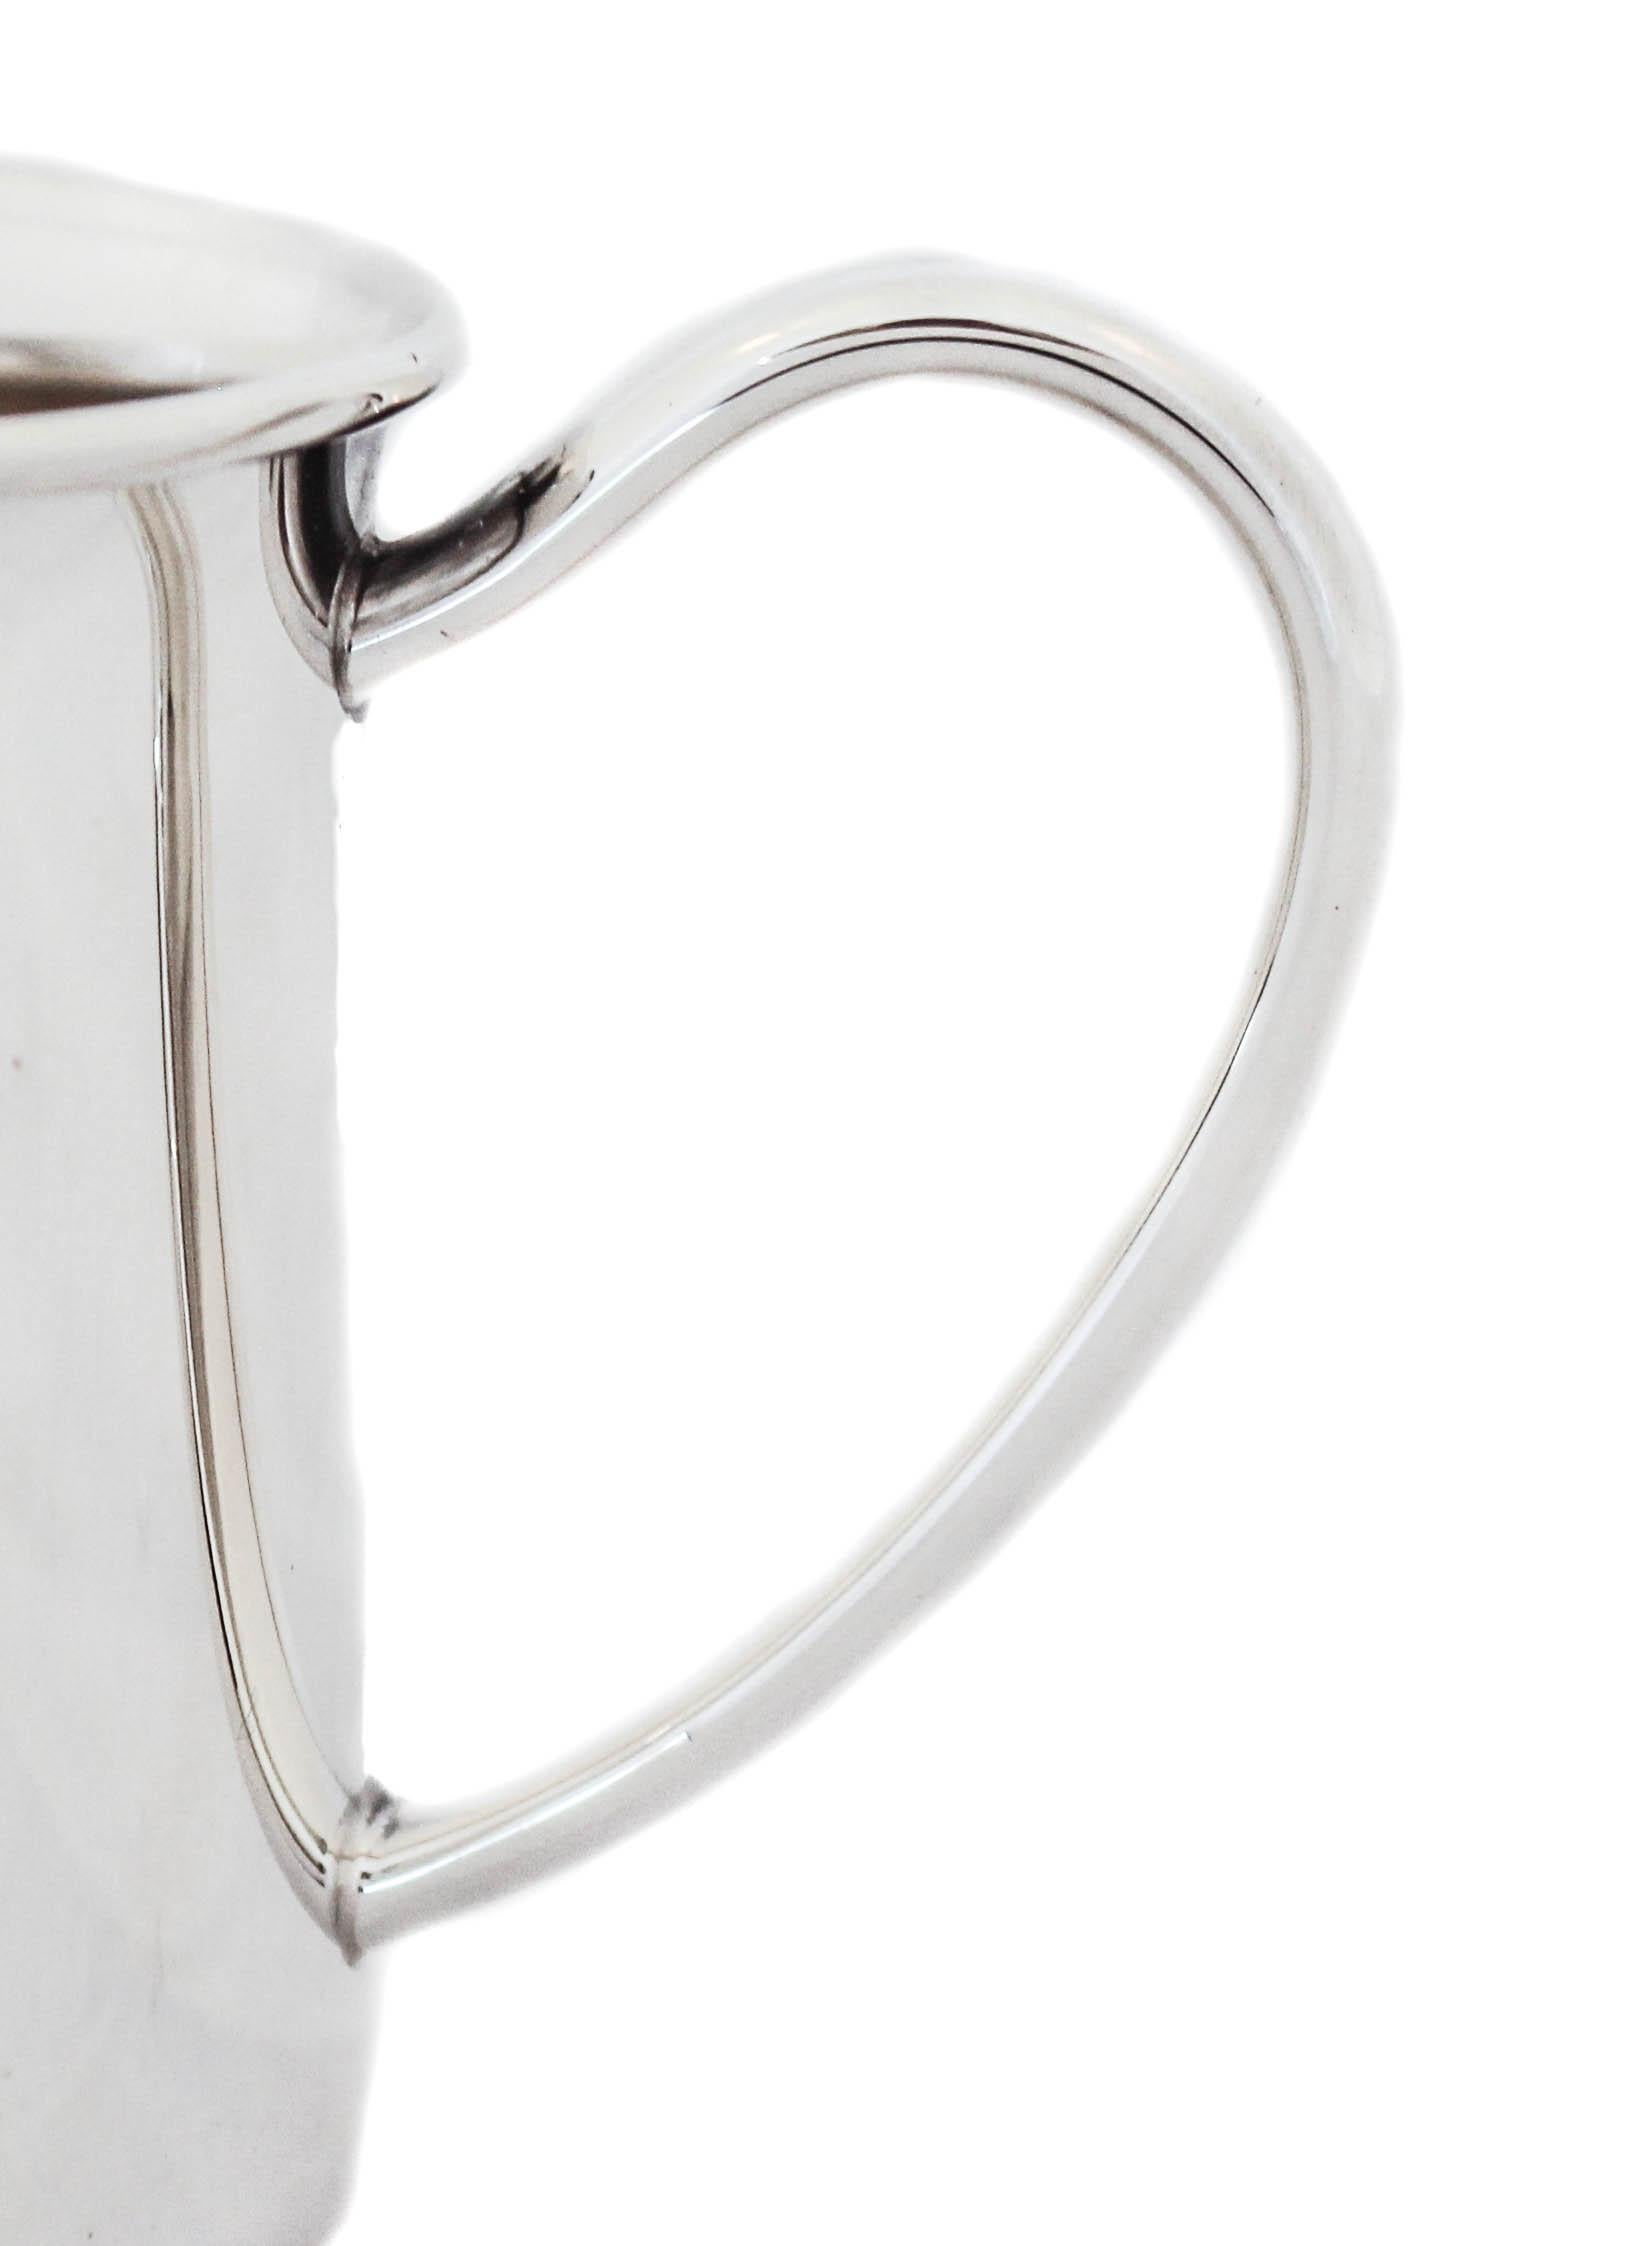 American Sterling Silver Baby Cup